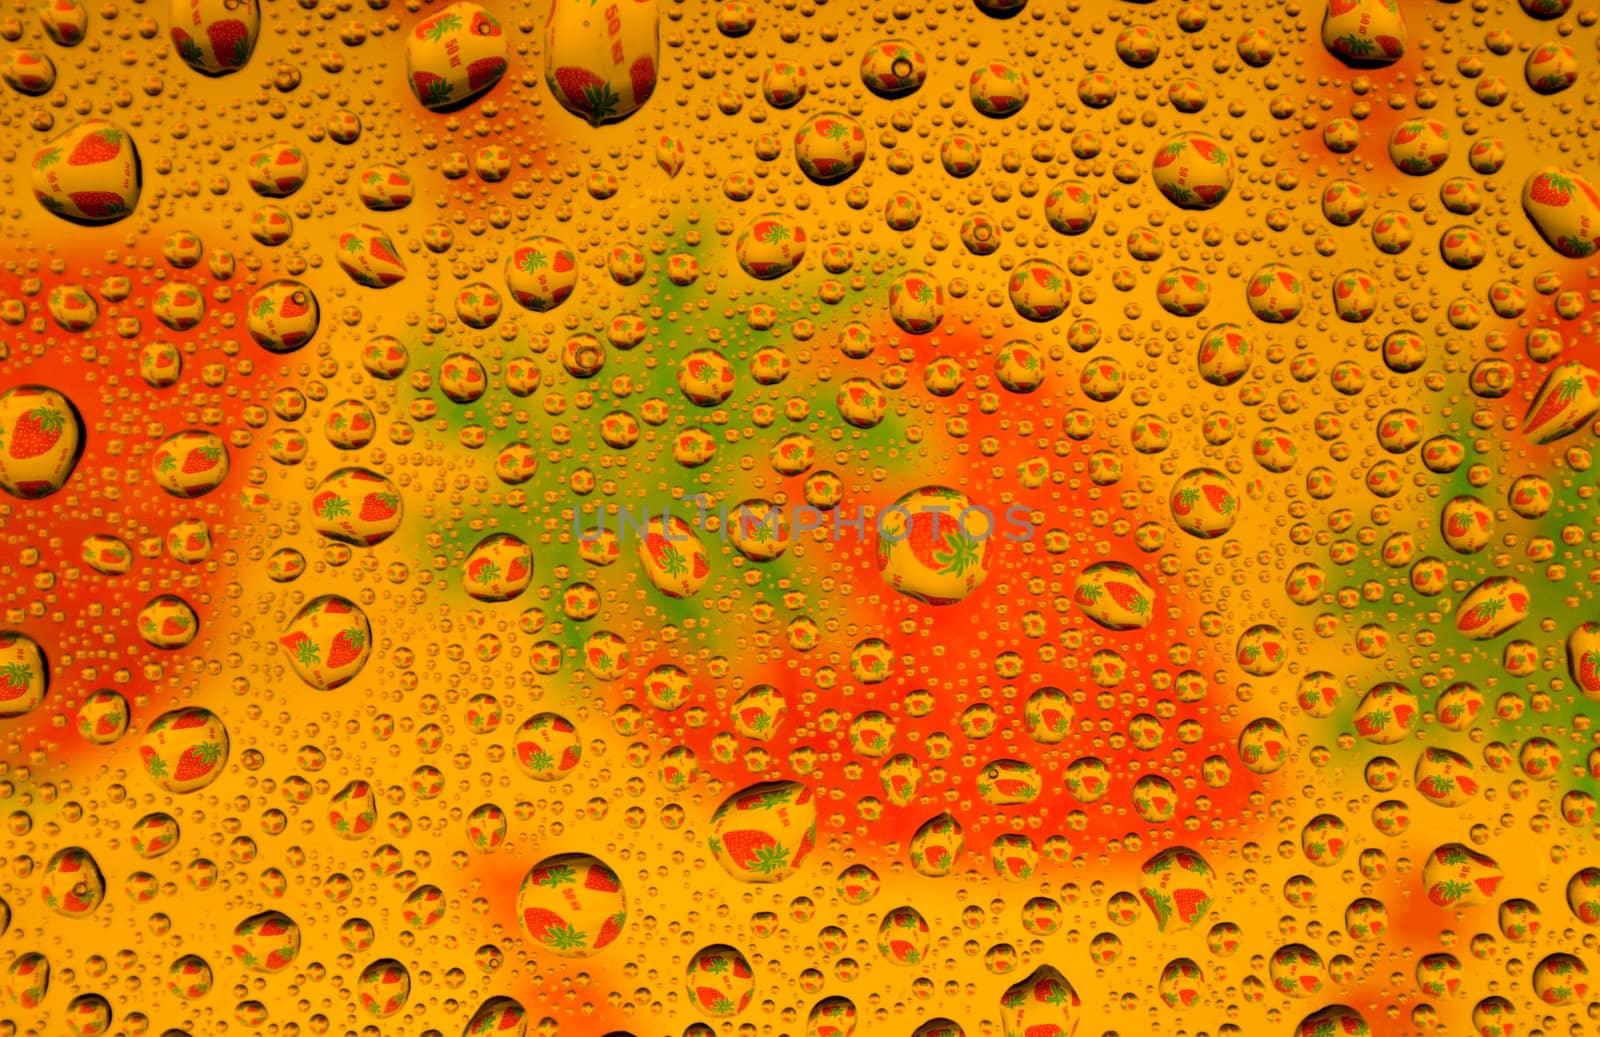 Water drops over strawberries background (close-up photo)